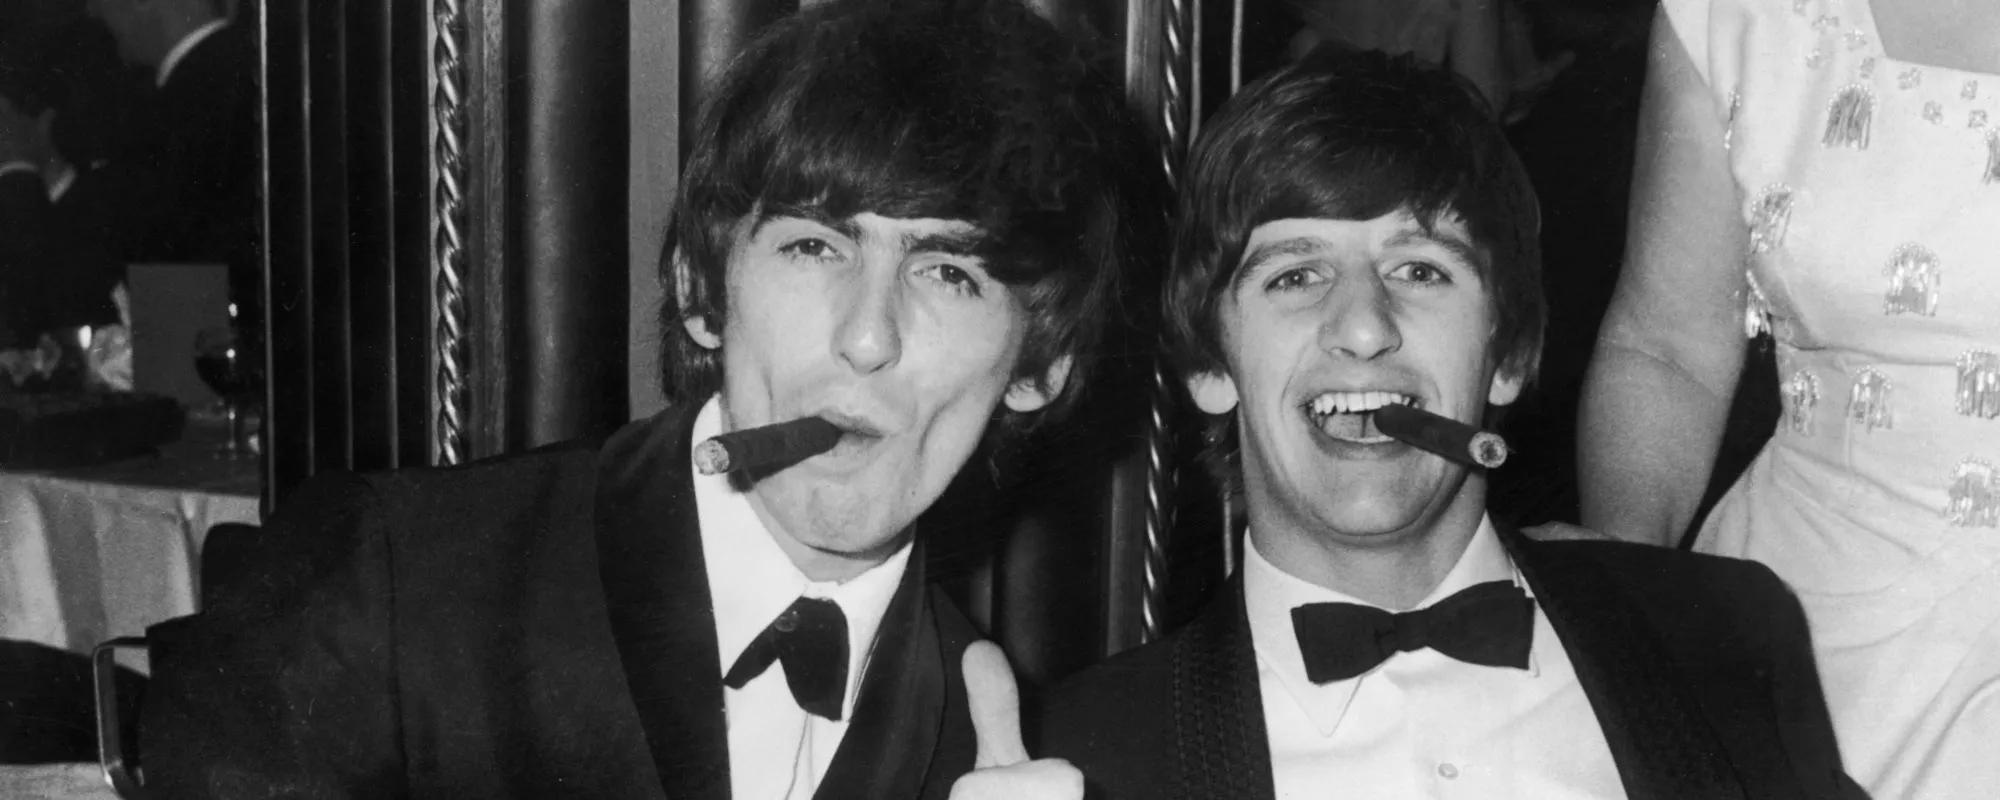 George Harrison and Ringo Starr smoking cigars together in 1964 London.